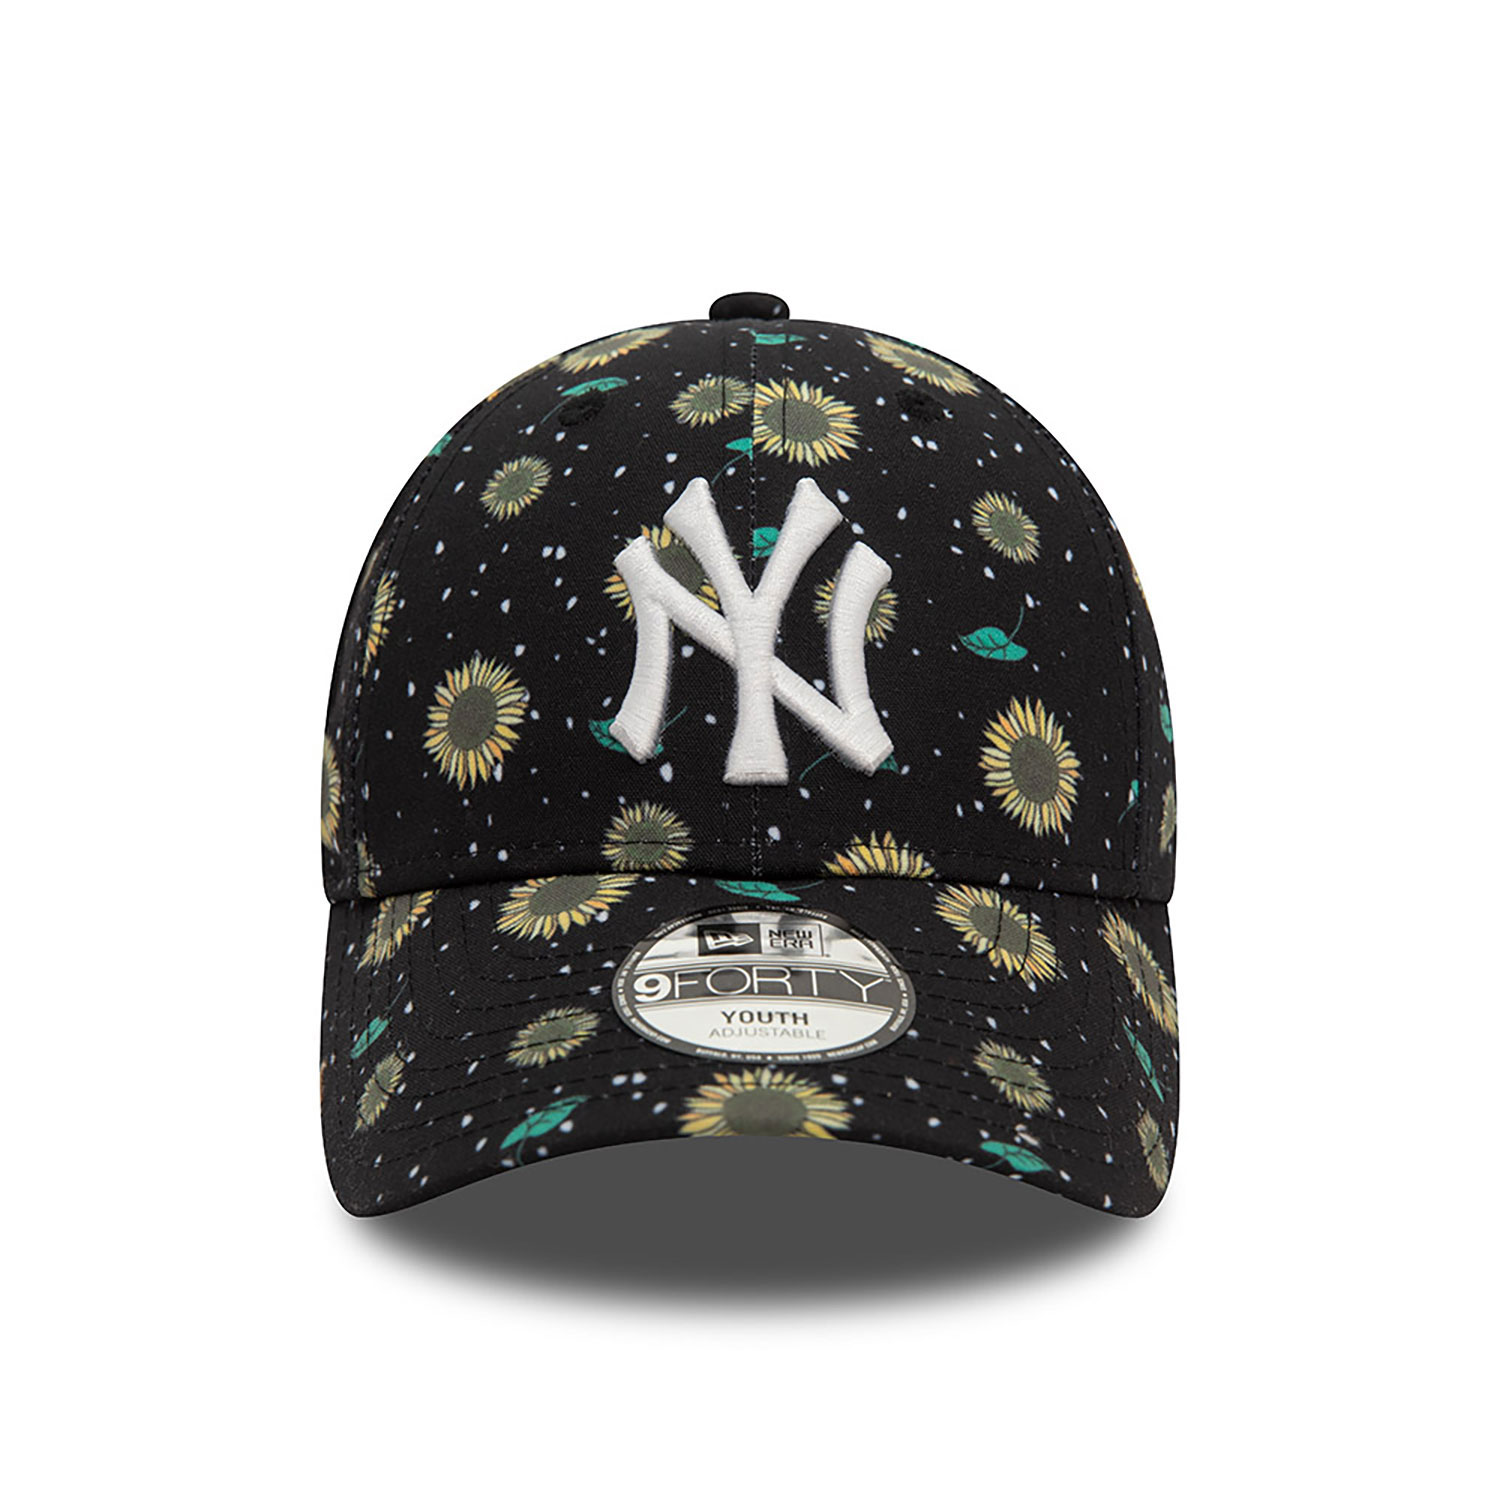 New York Yankees Youth Floral All Over Print Black 9FORTY Adjustable Cap